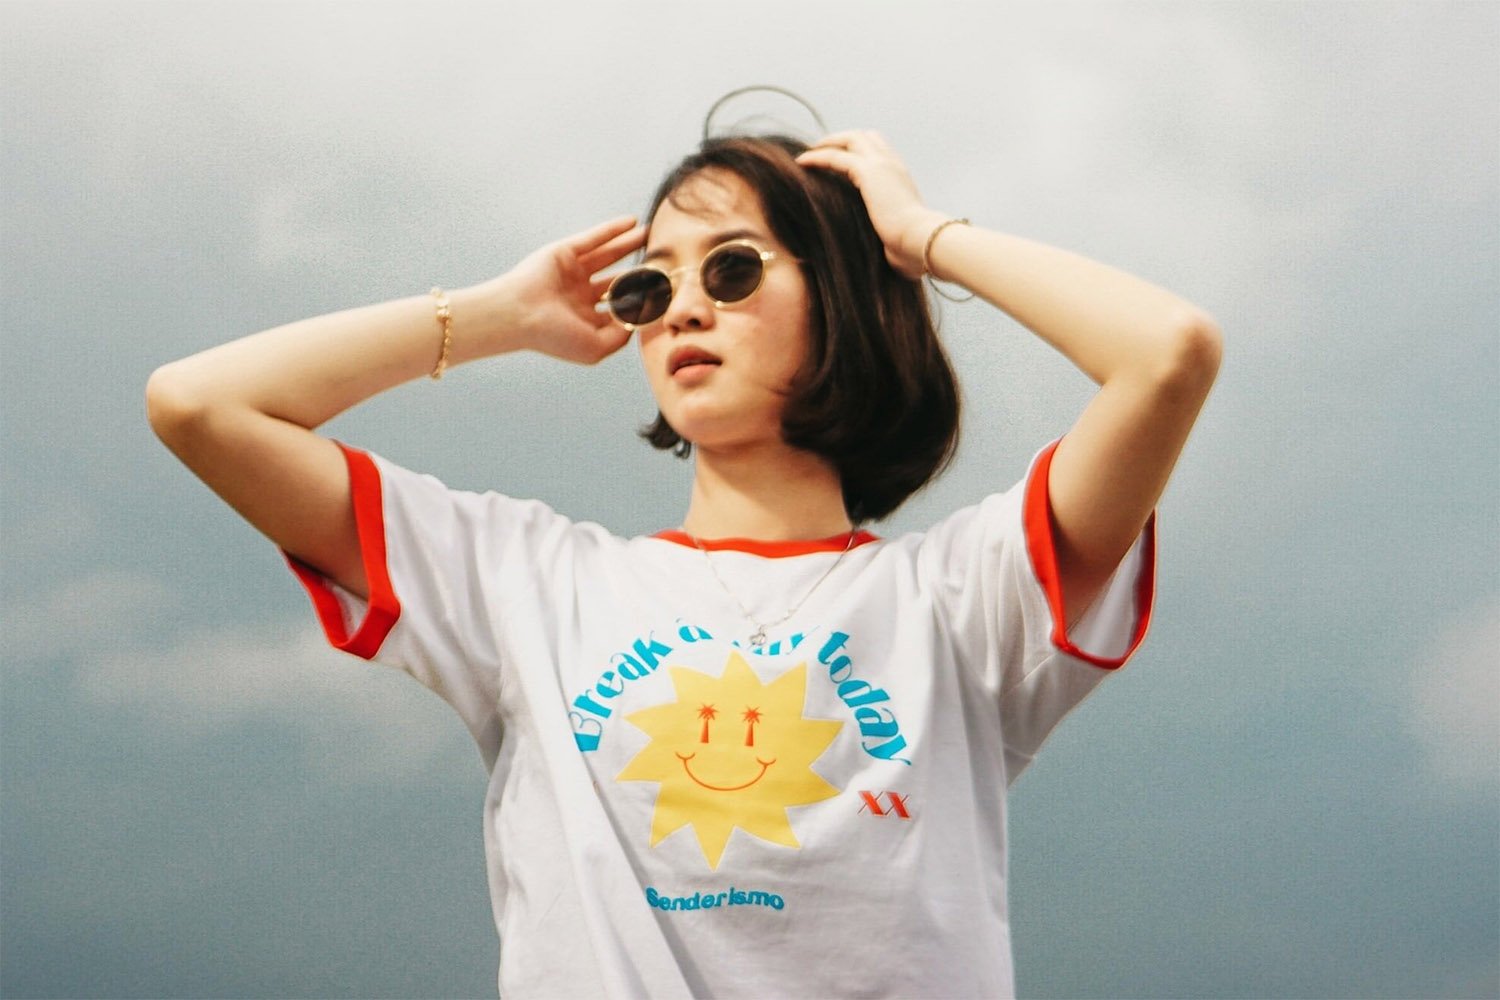 A young woman wearing sunglasses and a white shirt with a sun on it.